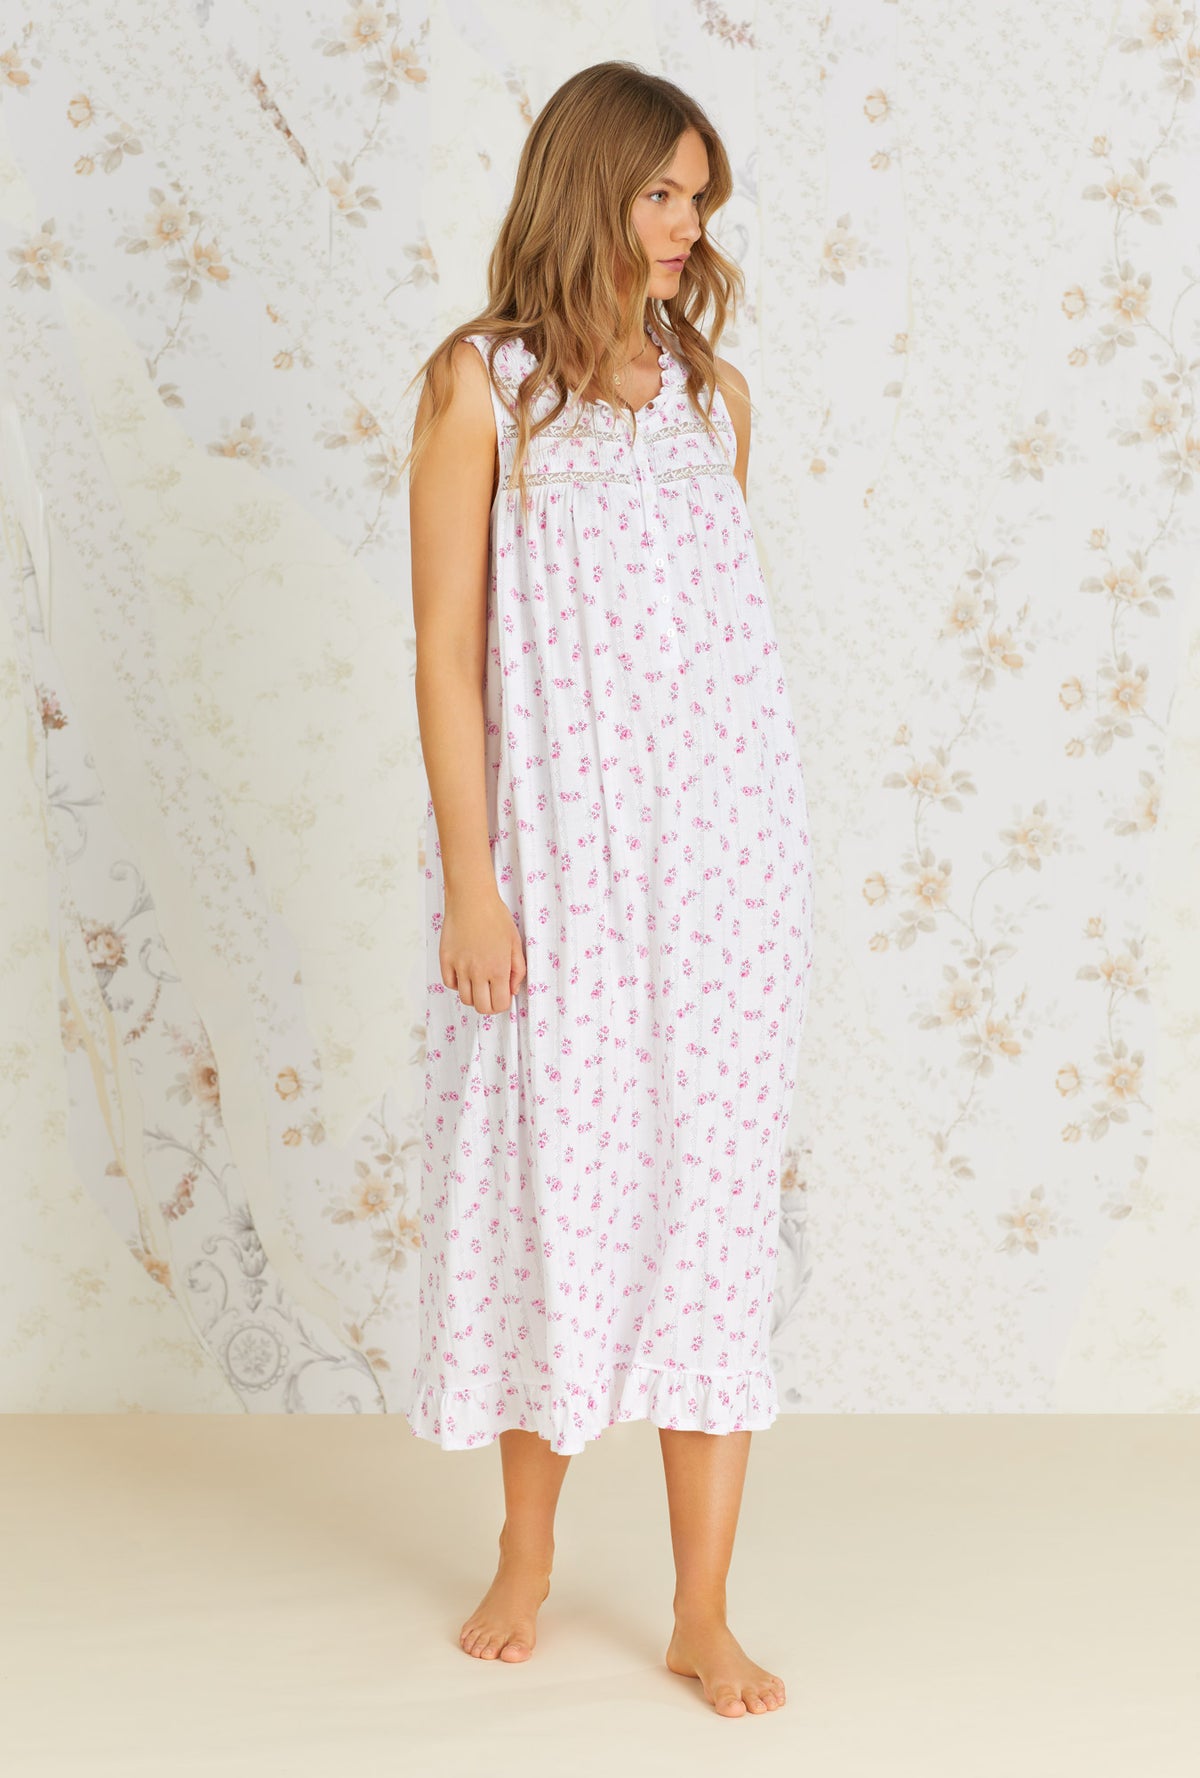 A lady wearing white sleeveless nursing nightgown with vintage rose pointelle print.